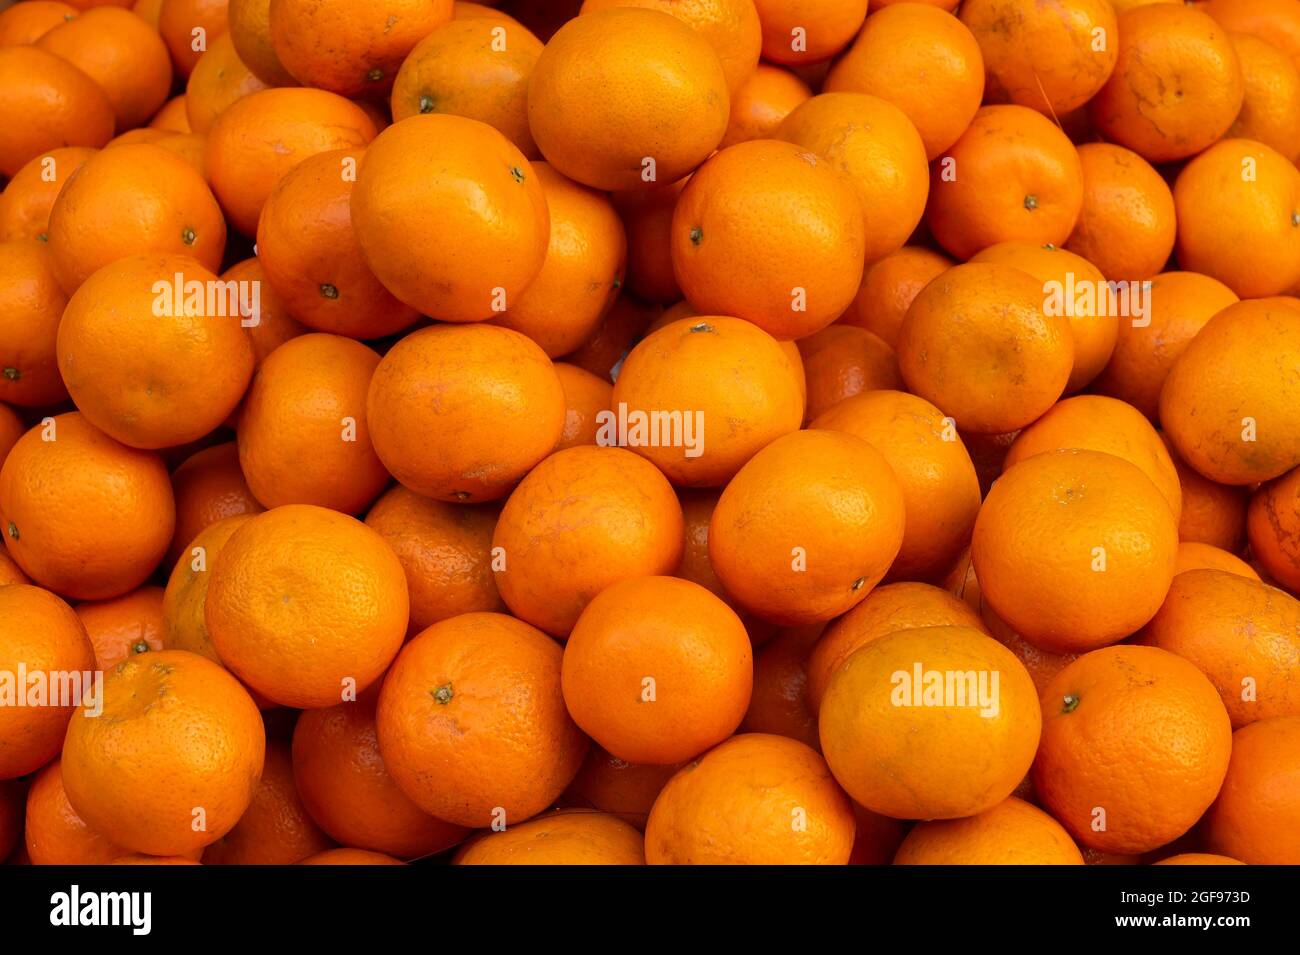 Bunch of Oranges or sweet orange fruits, scientific fruit family Rutaceae, are displayed for sale at New Market area, Kolkata, India. Stock Photo